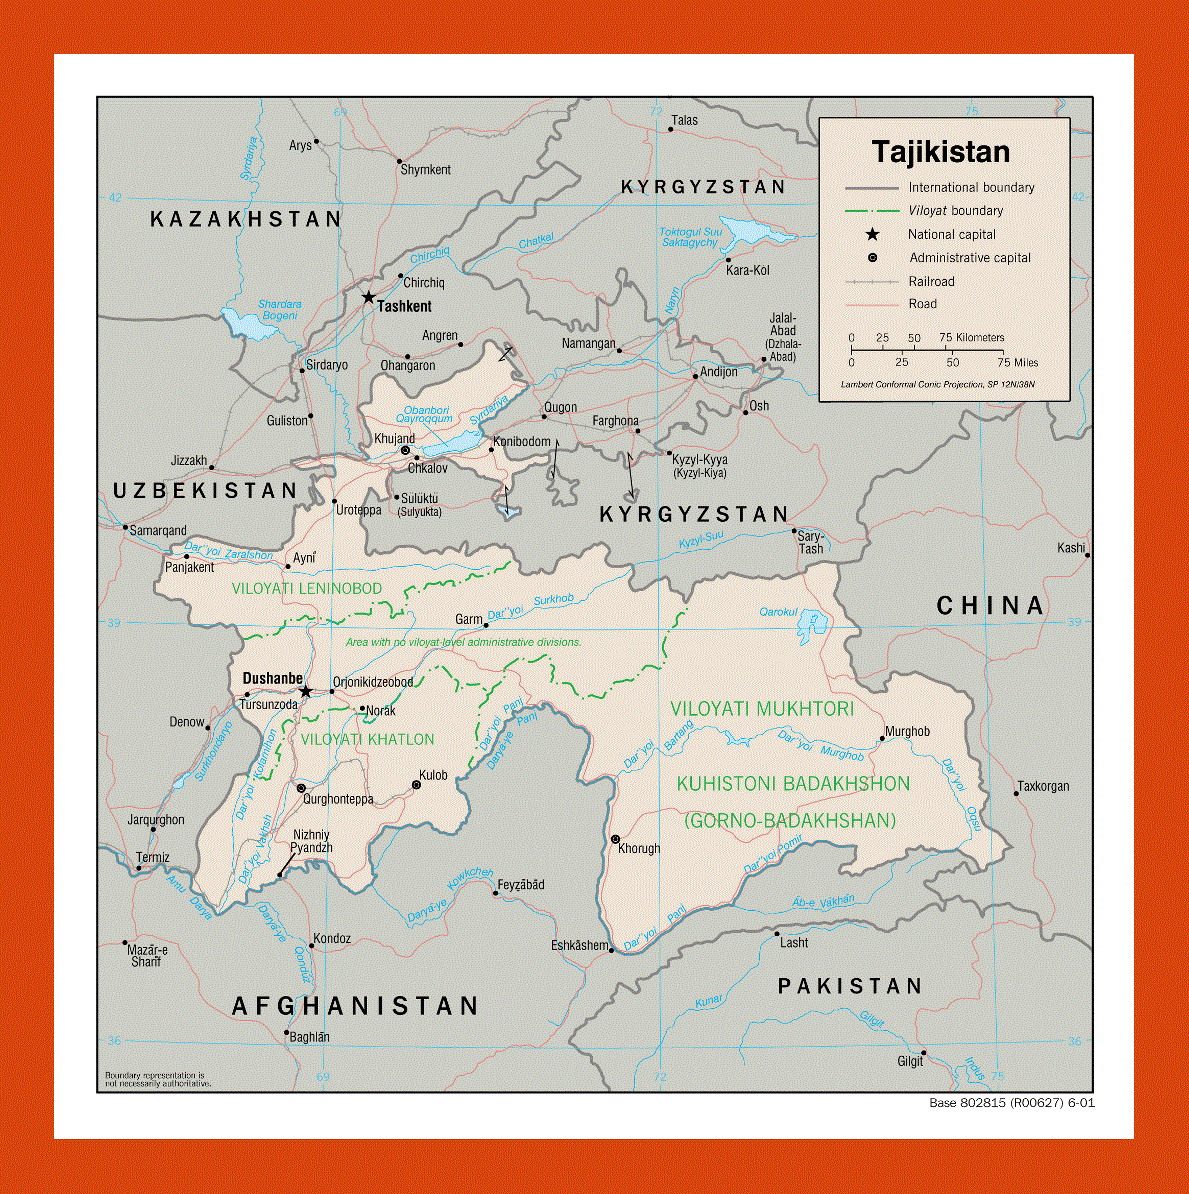 Political and administrative map of Tajikistan - 2001